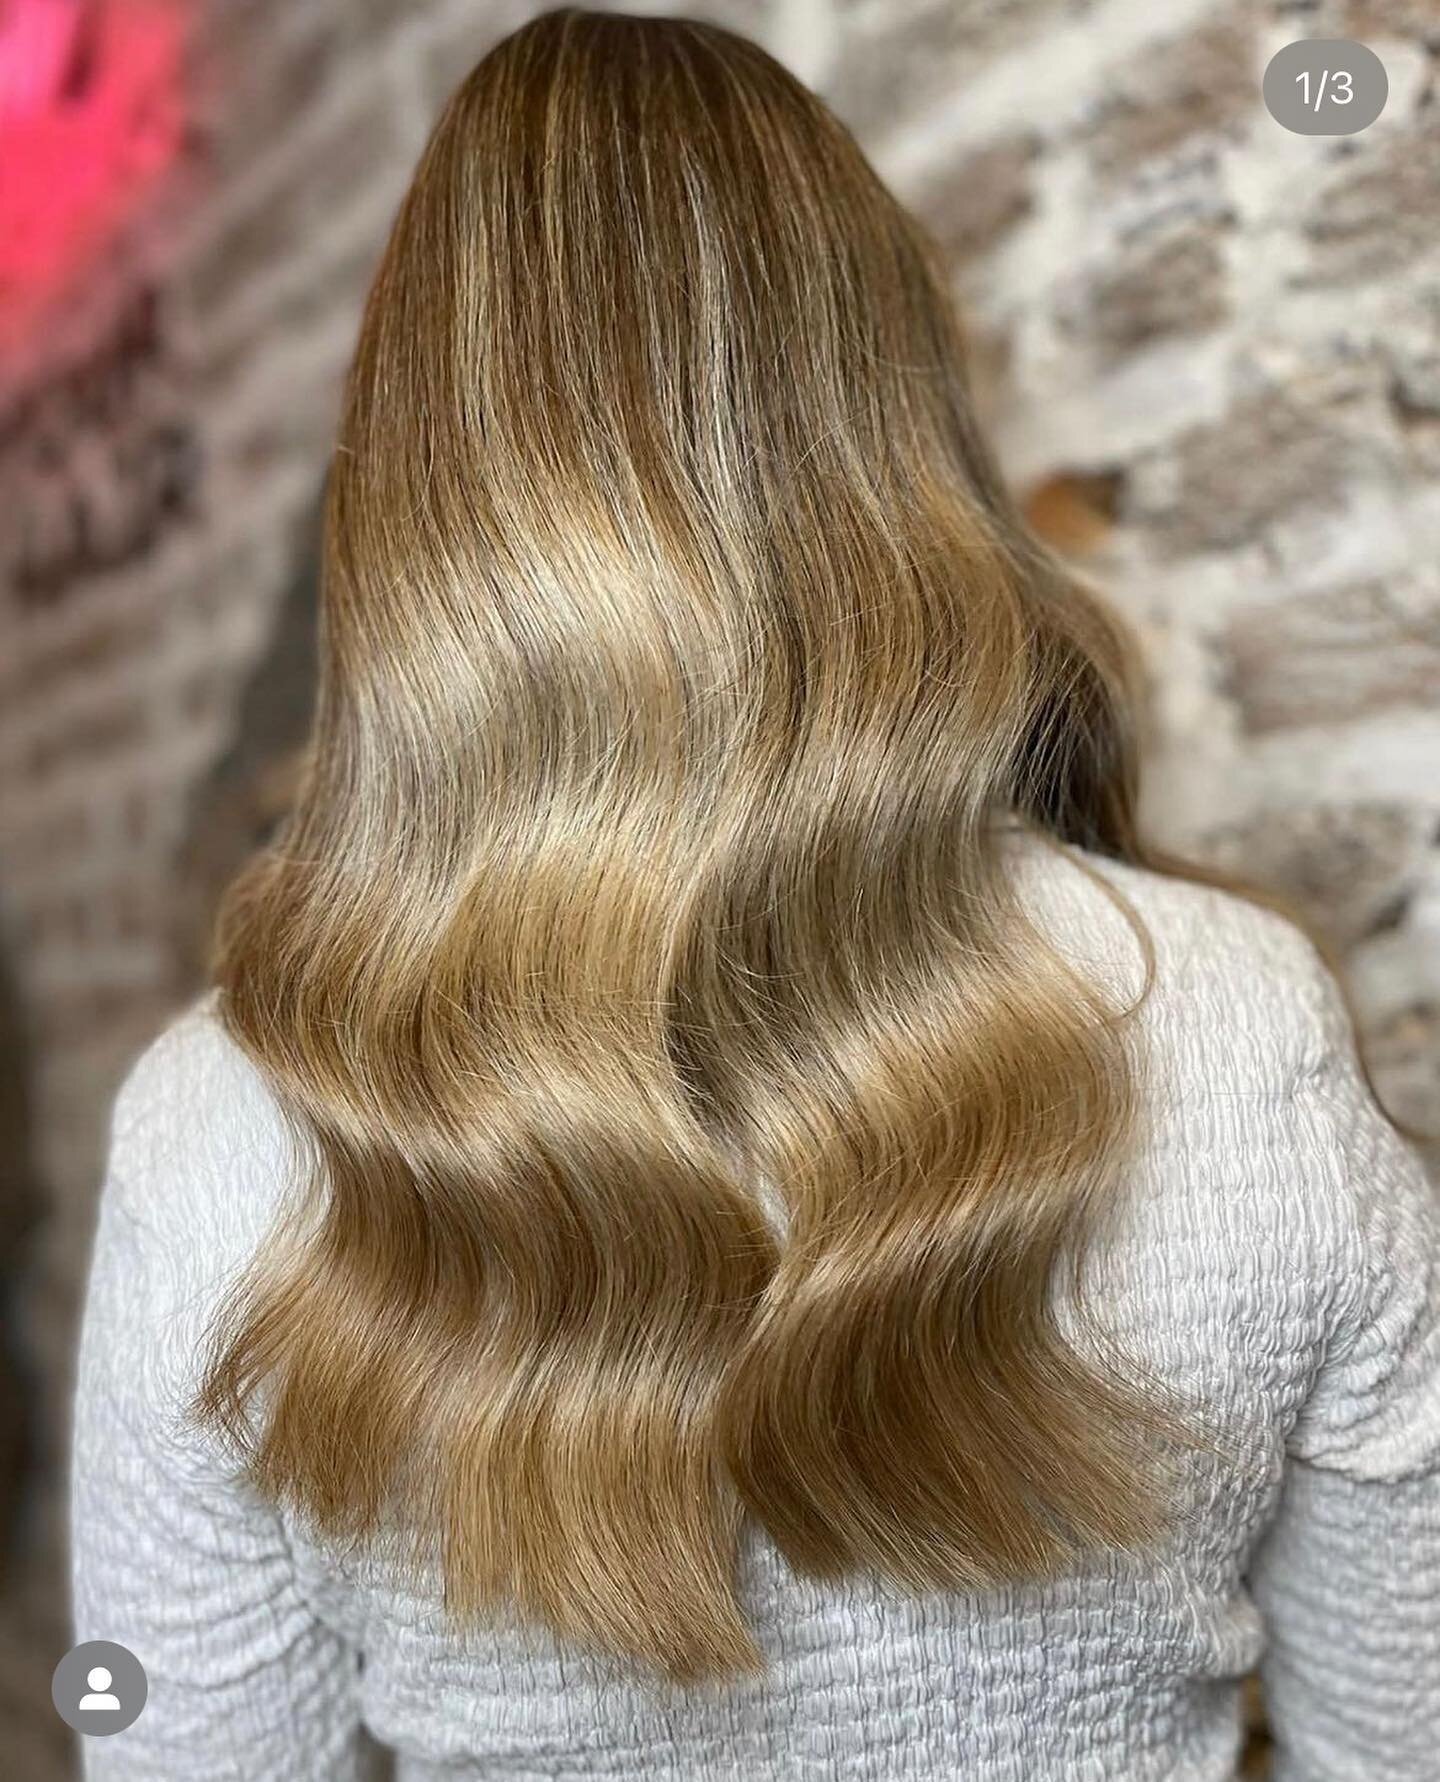 📣📣📣📣📣

20% off all colour services for the last week in October (24th-31st oct 2022) in our Wicklow St and Dublin Landings salons only ❤️ 

Book now to avoid missing out on this amazing offer (link in bio) 

All colour services require a patch t